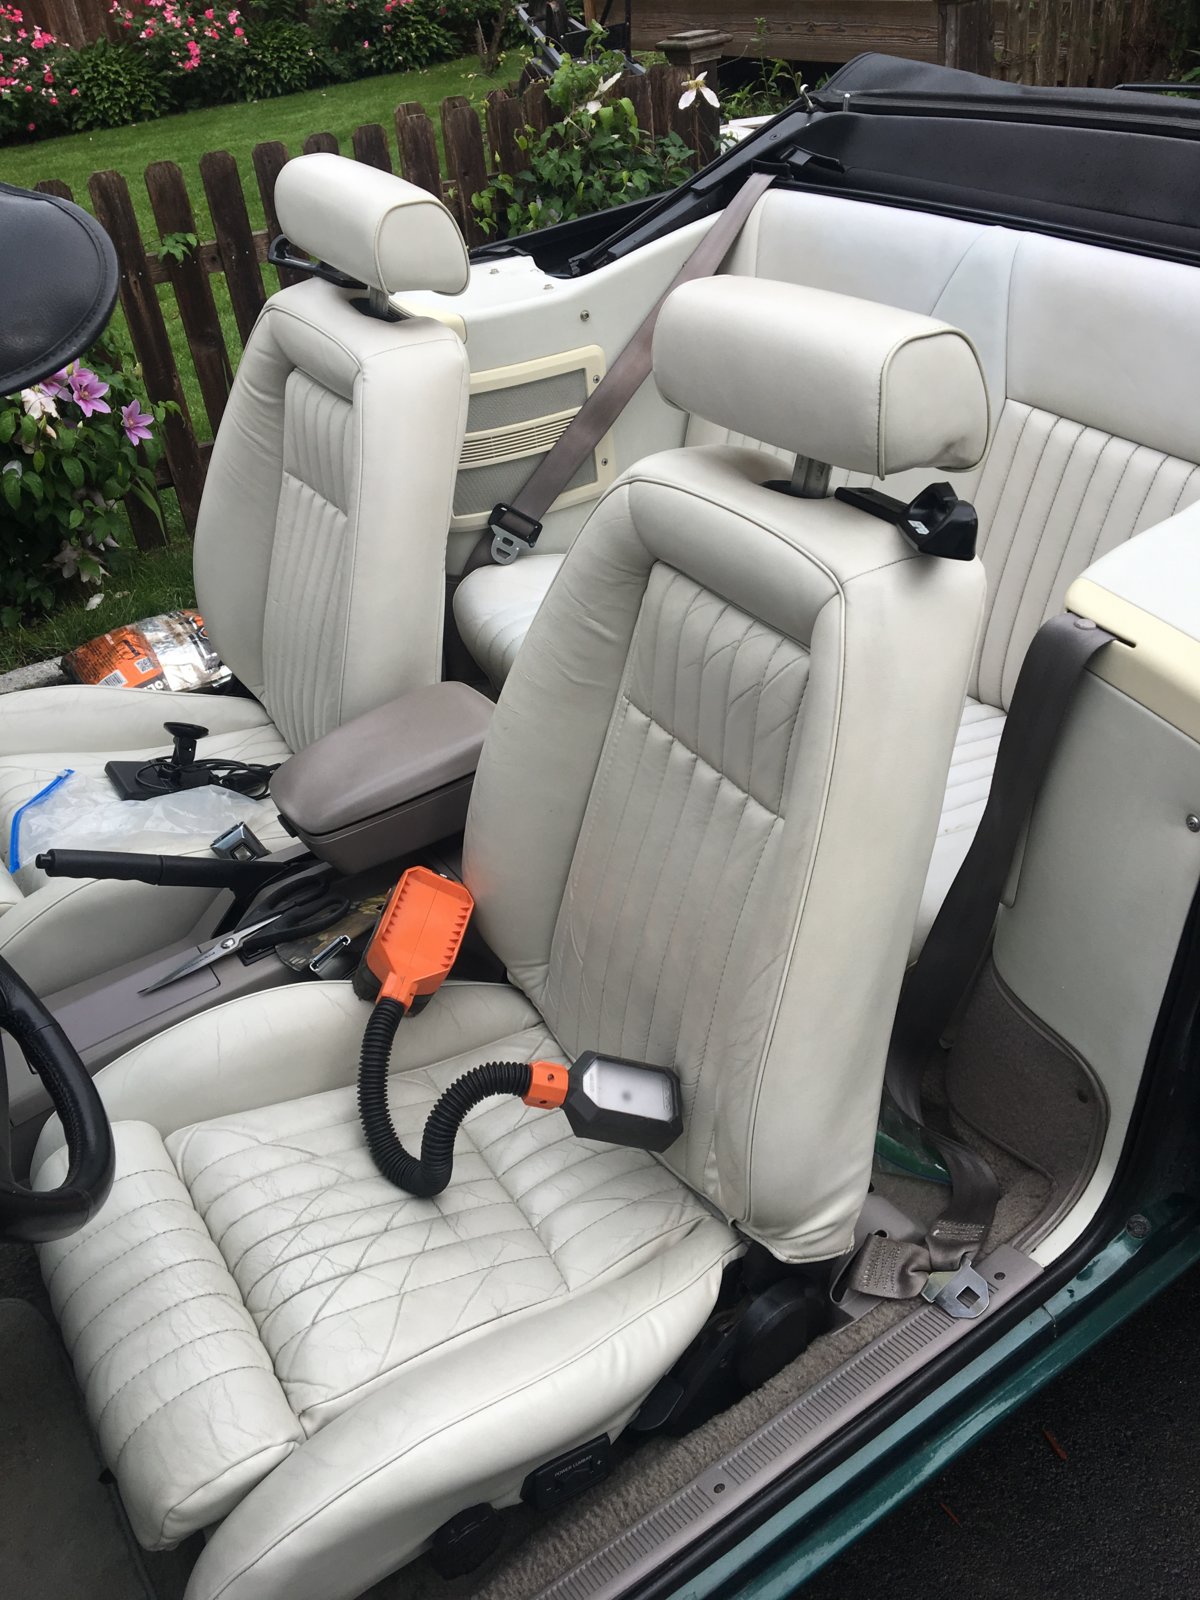 Fox Oxford White Leather Interior, Leather Interior Paint